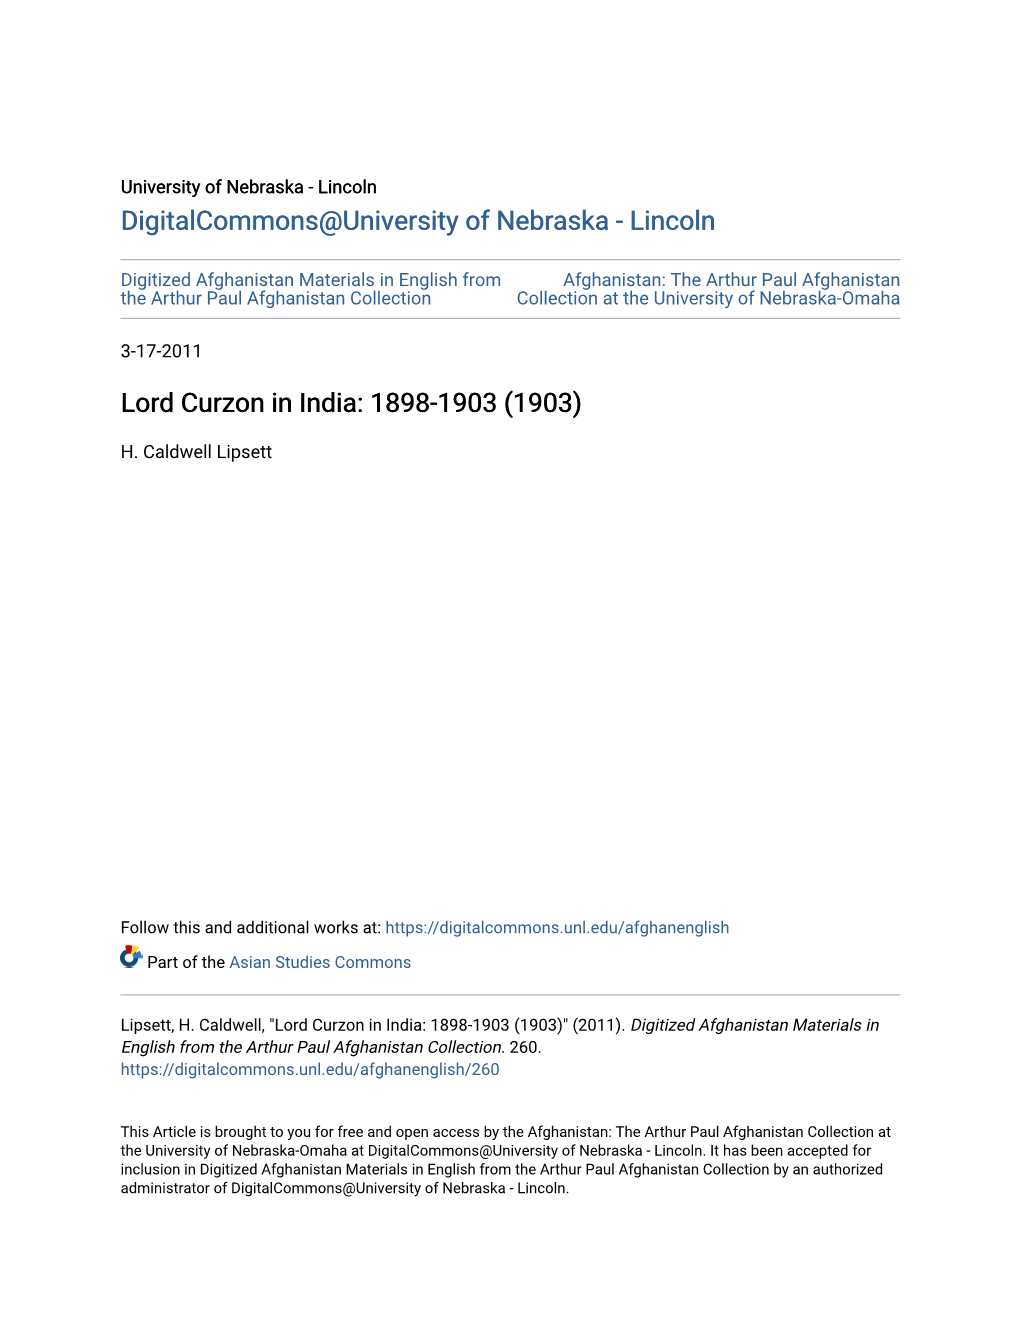 Lord Curzon in India: 1898-1903 (1903)